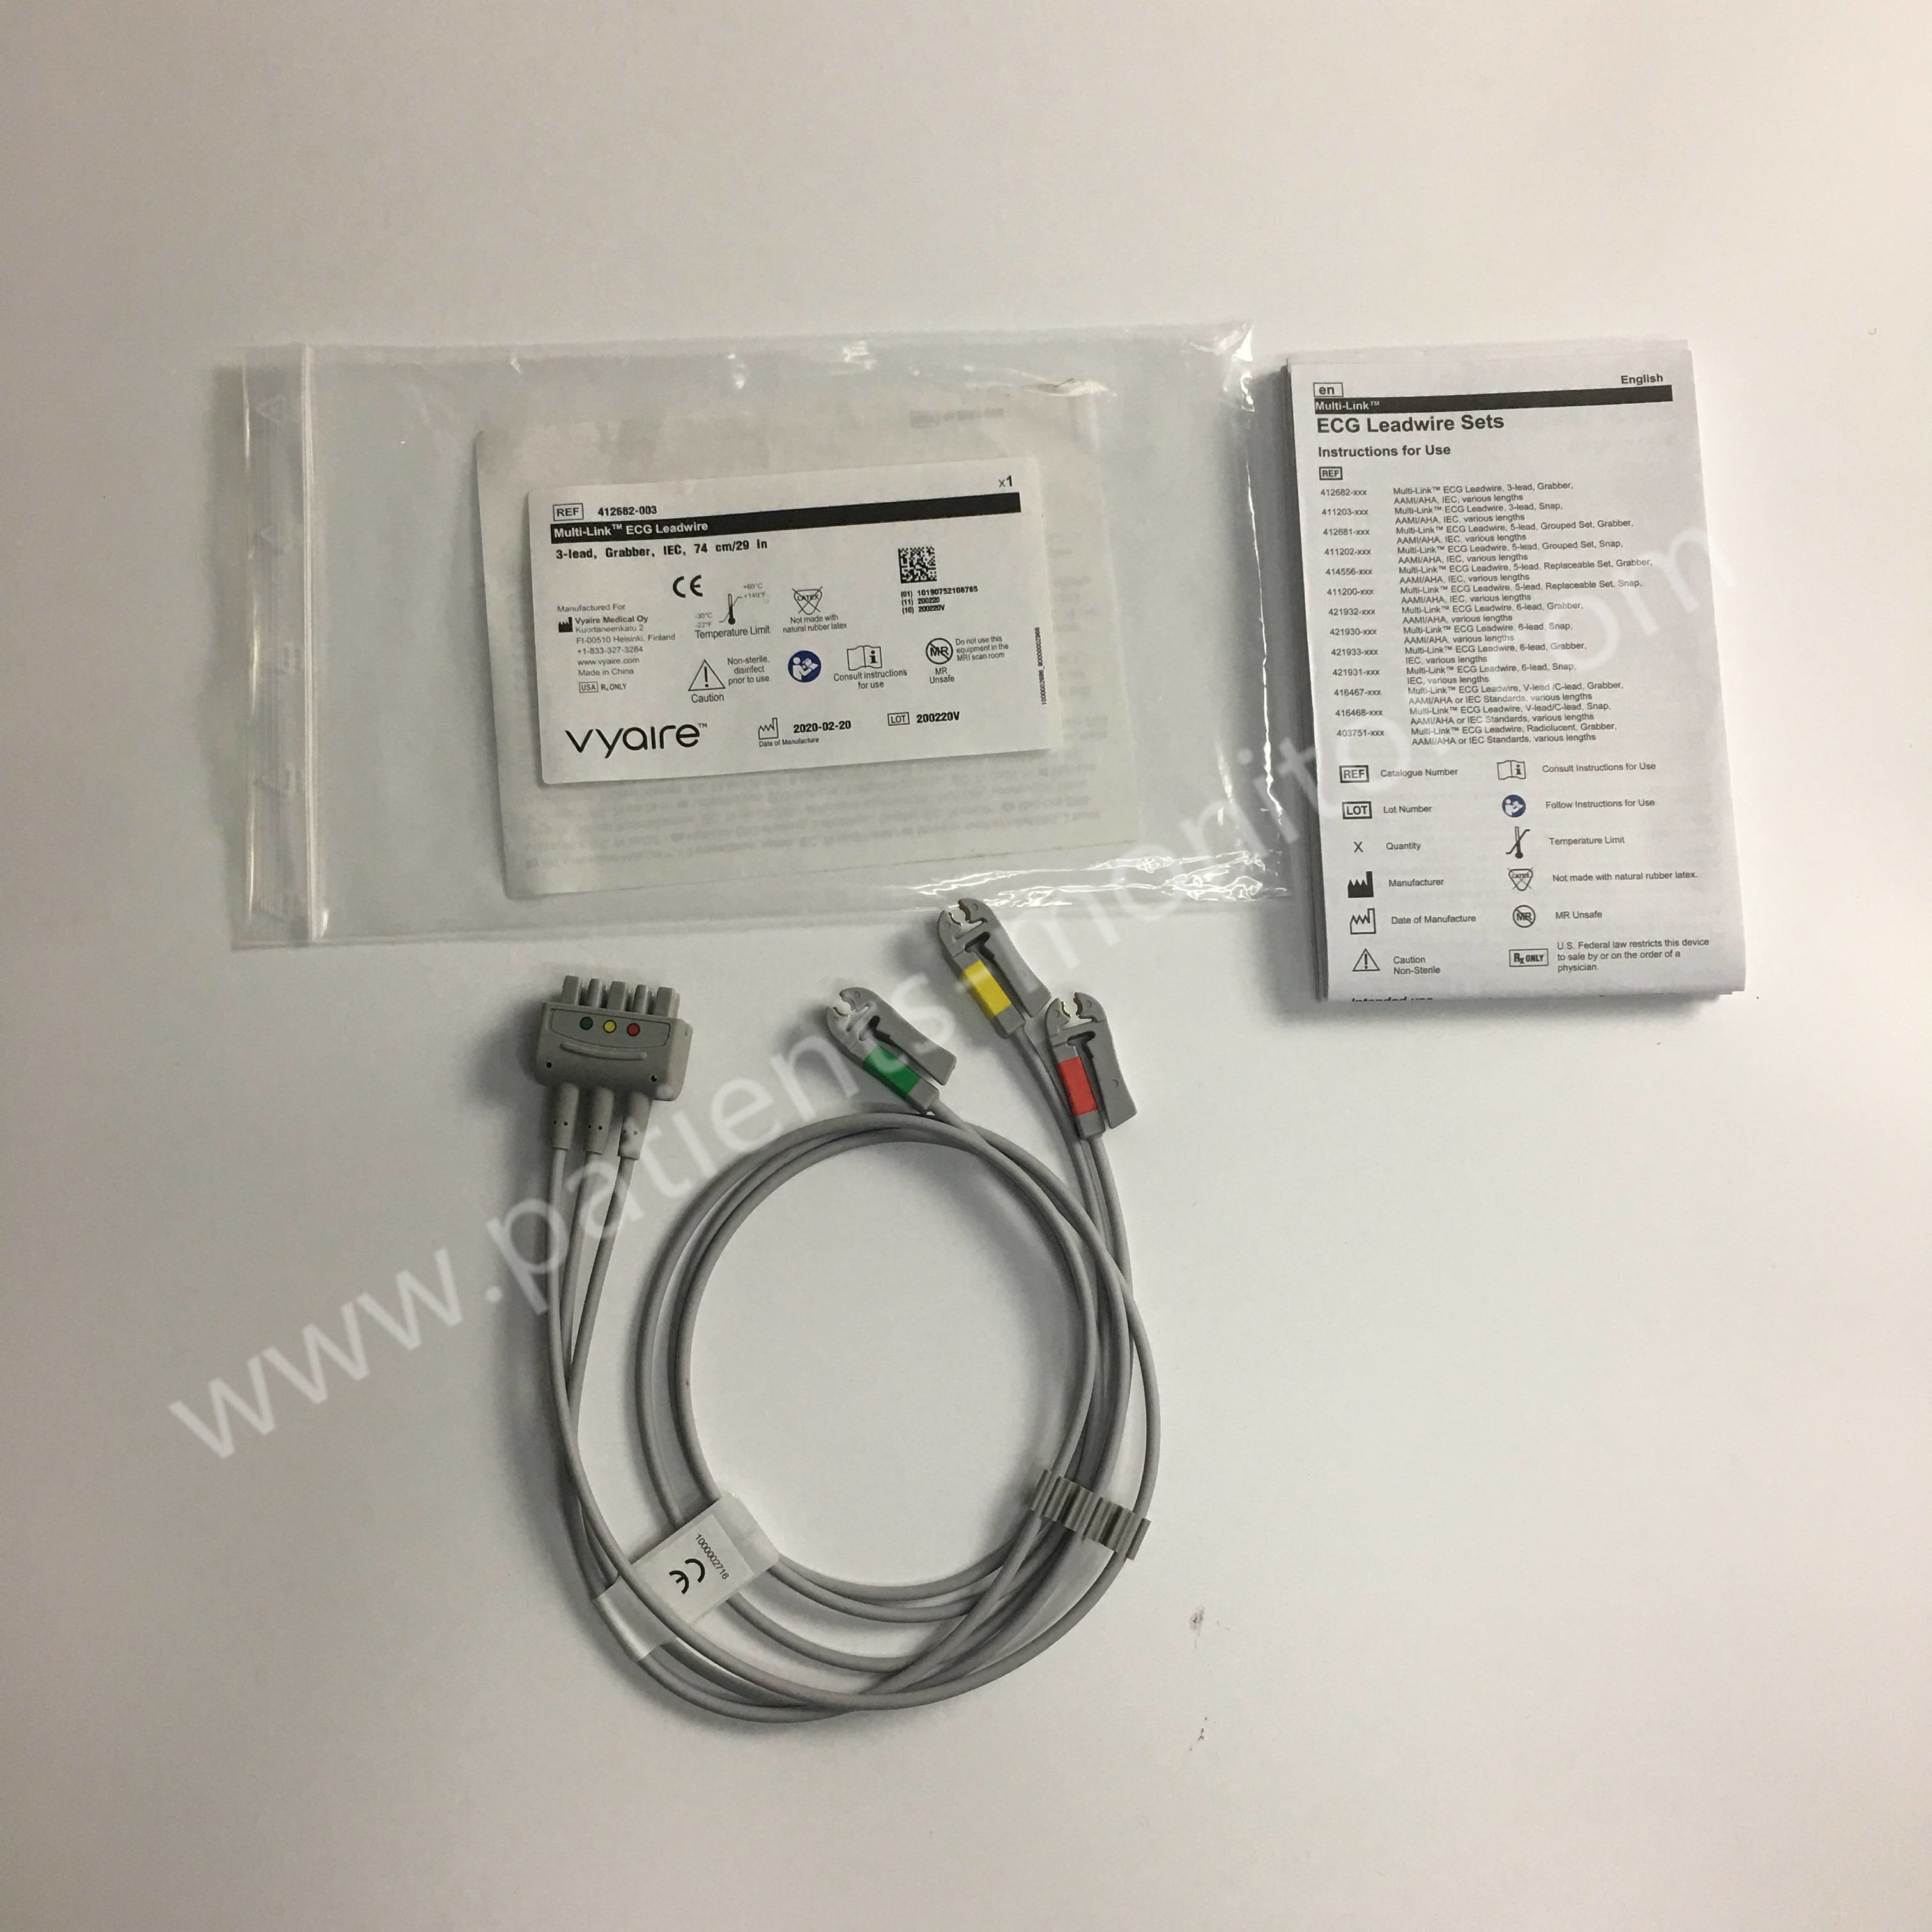  Vyaire GE Multi - Link ECG Leadwire 3-Lead Grabber IEC 74cm 29in 412682-003 Manufactures